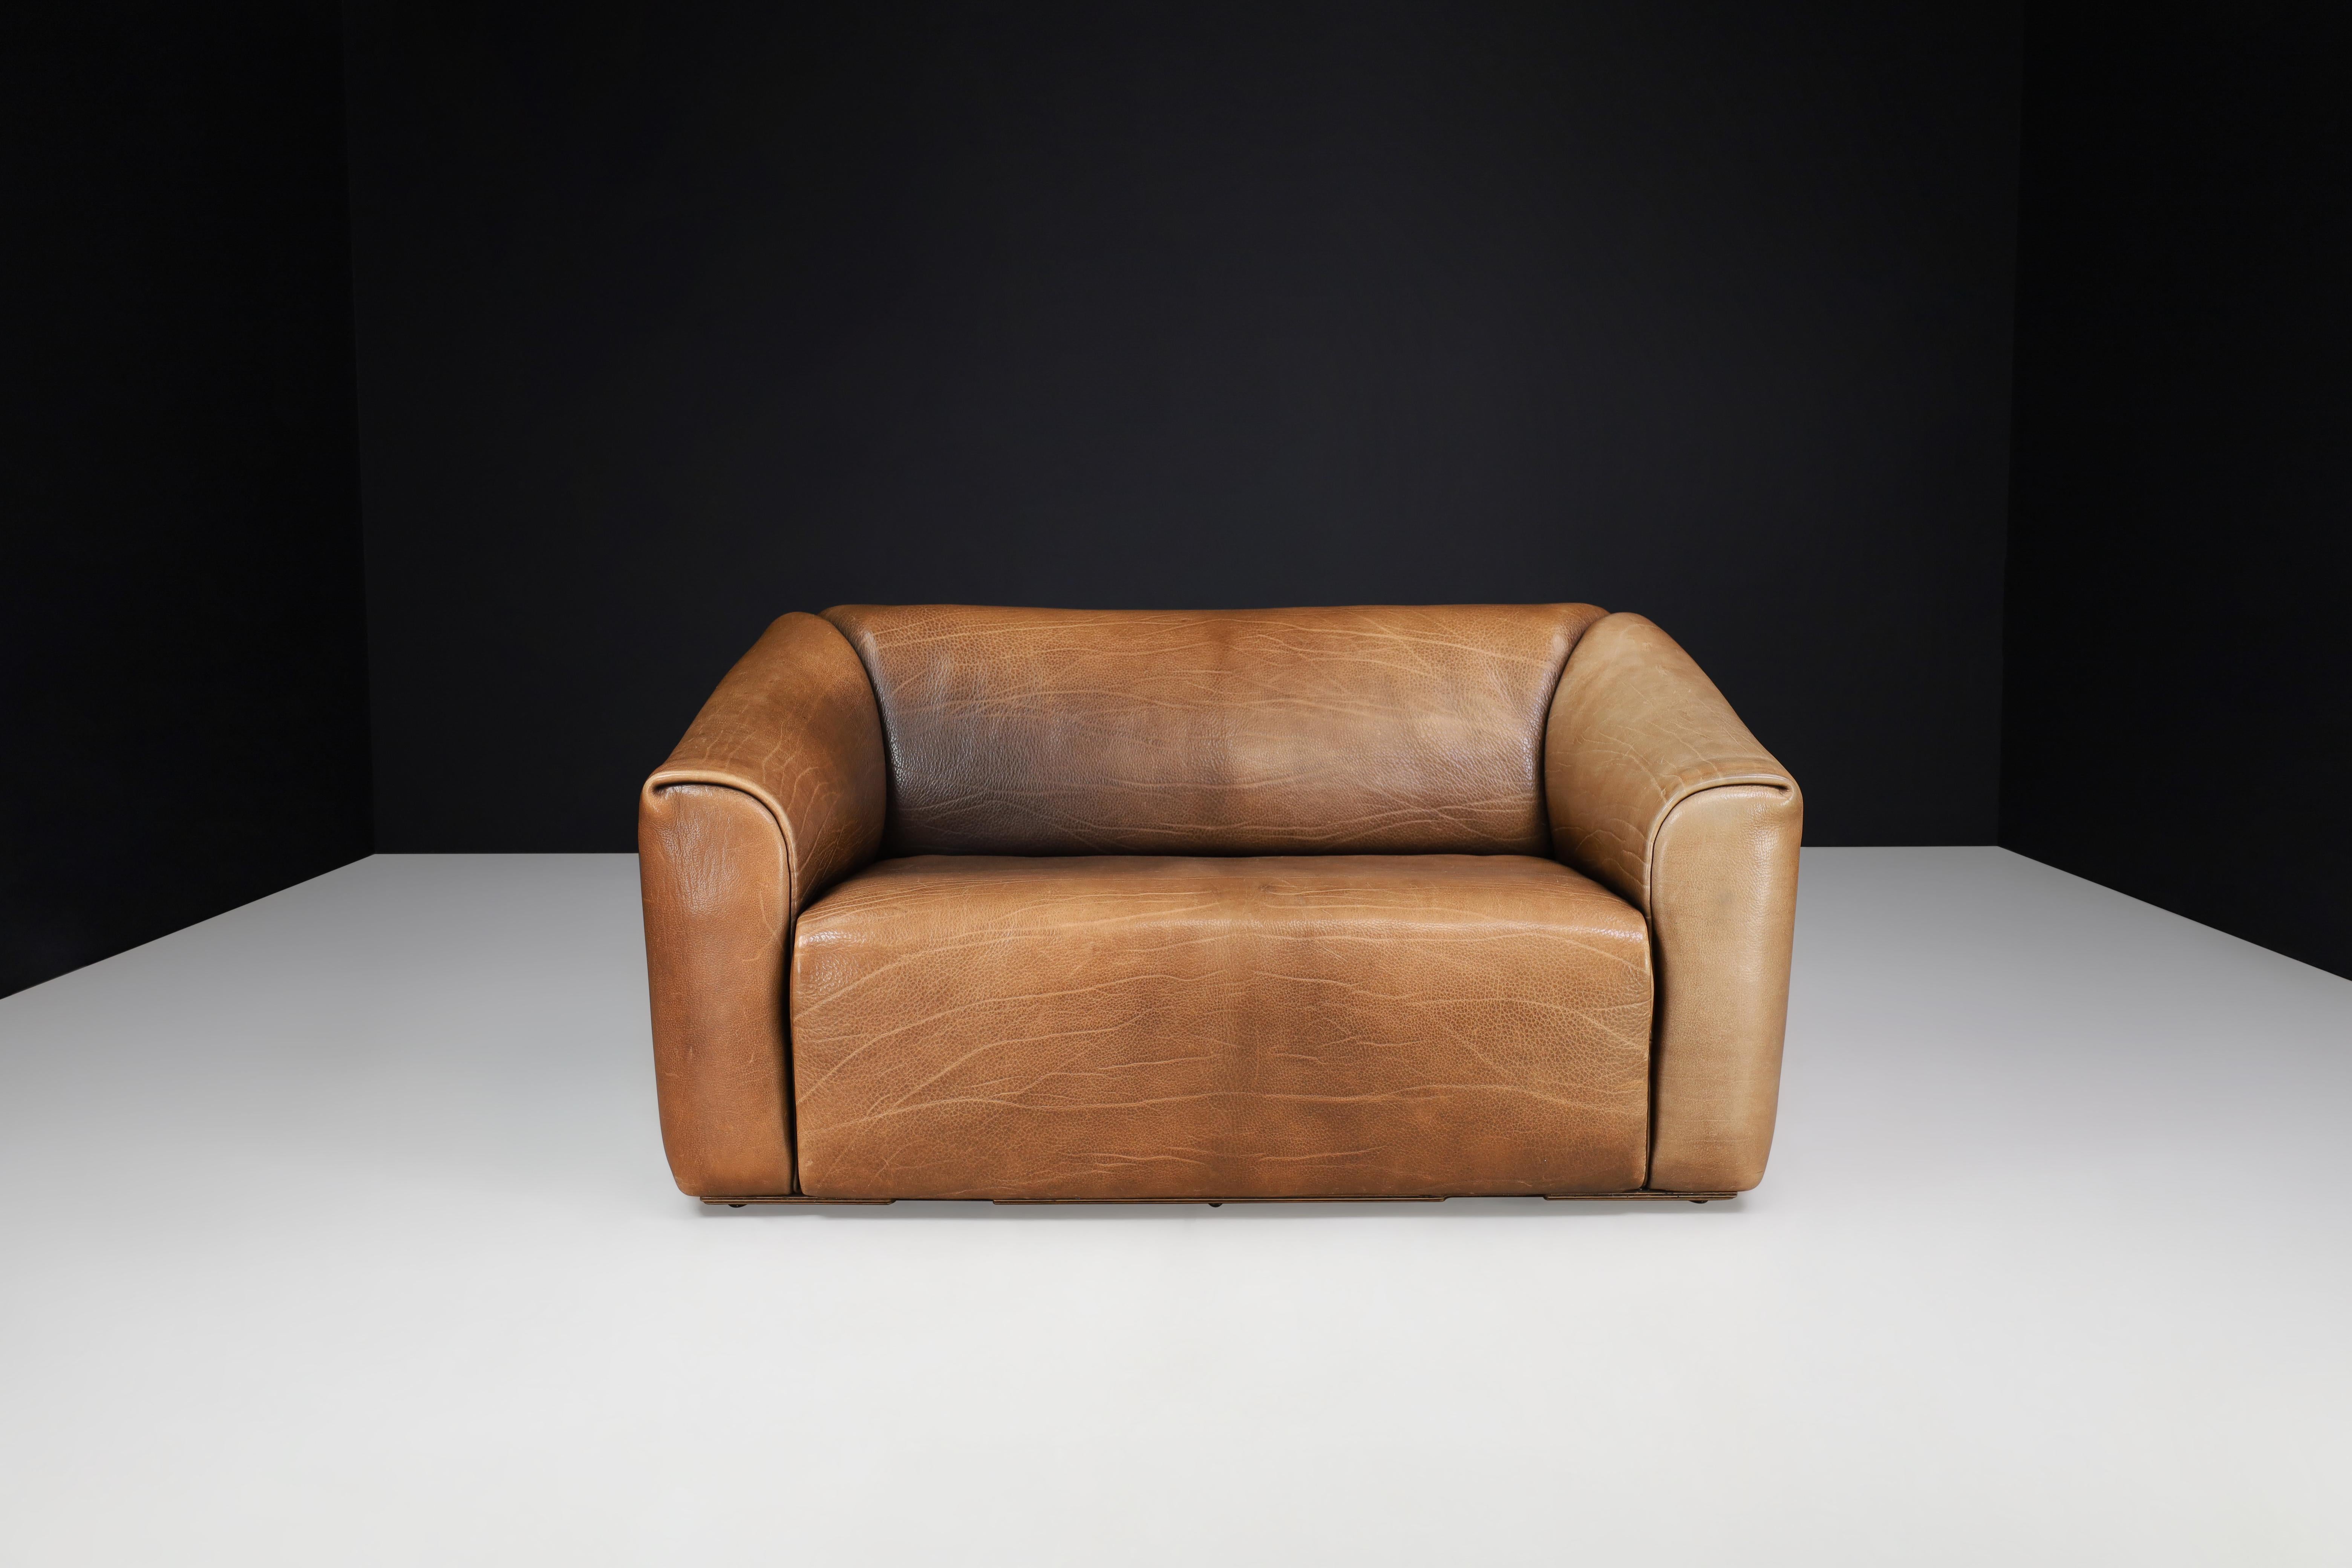 De Sede DS-47 neck leather sofa from Switzerland 1970s

Introducing the De Sede DS-47 Neck Leather two-seat Sofa, crafted in the 1970s in Switzerland with great attention to detail. This Sofa is comfortable and sturdy and showcases unique features